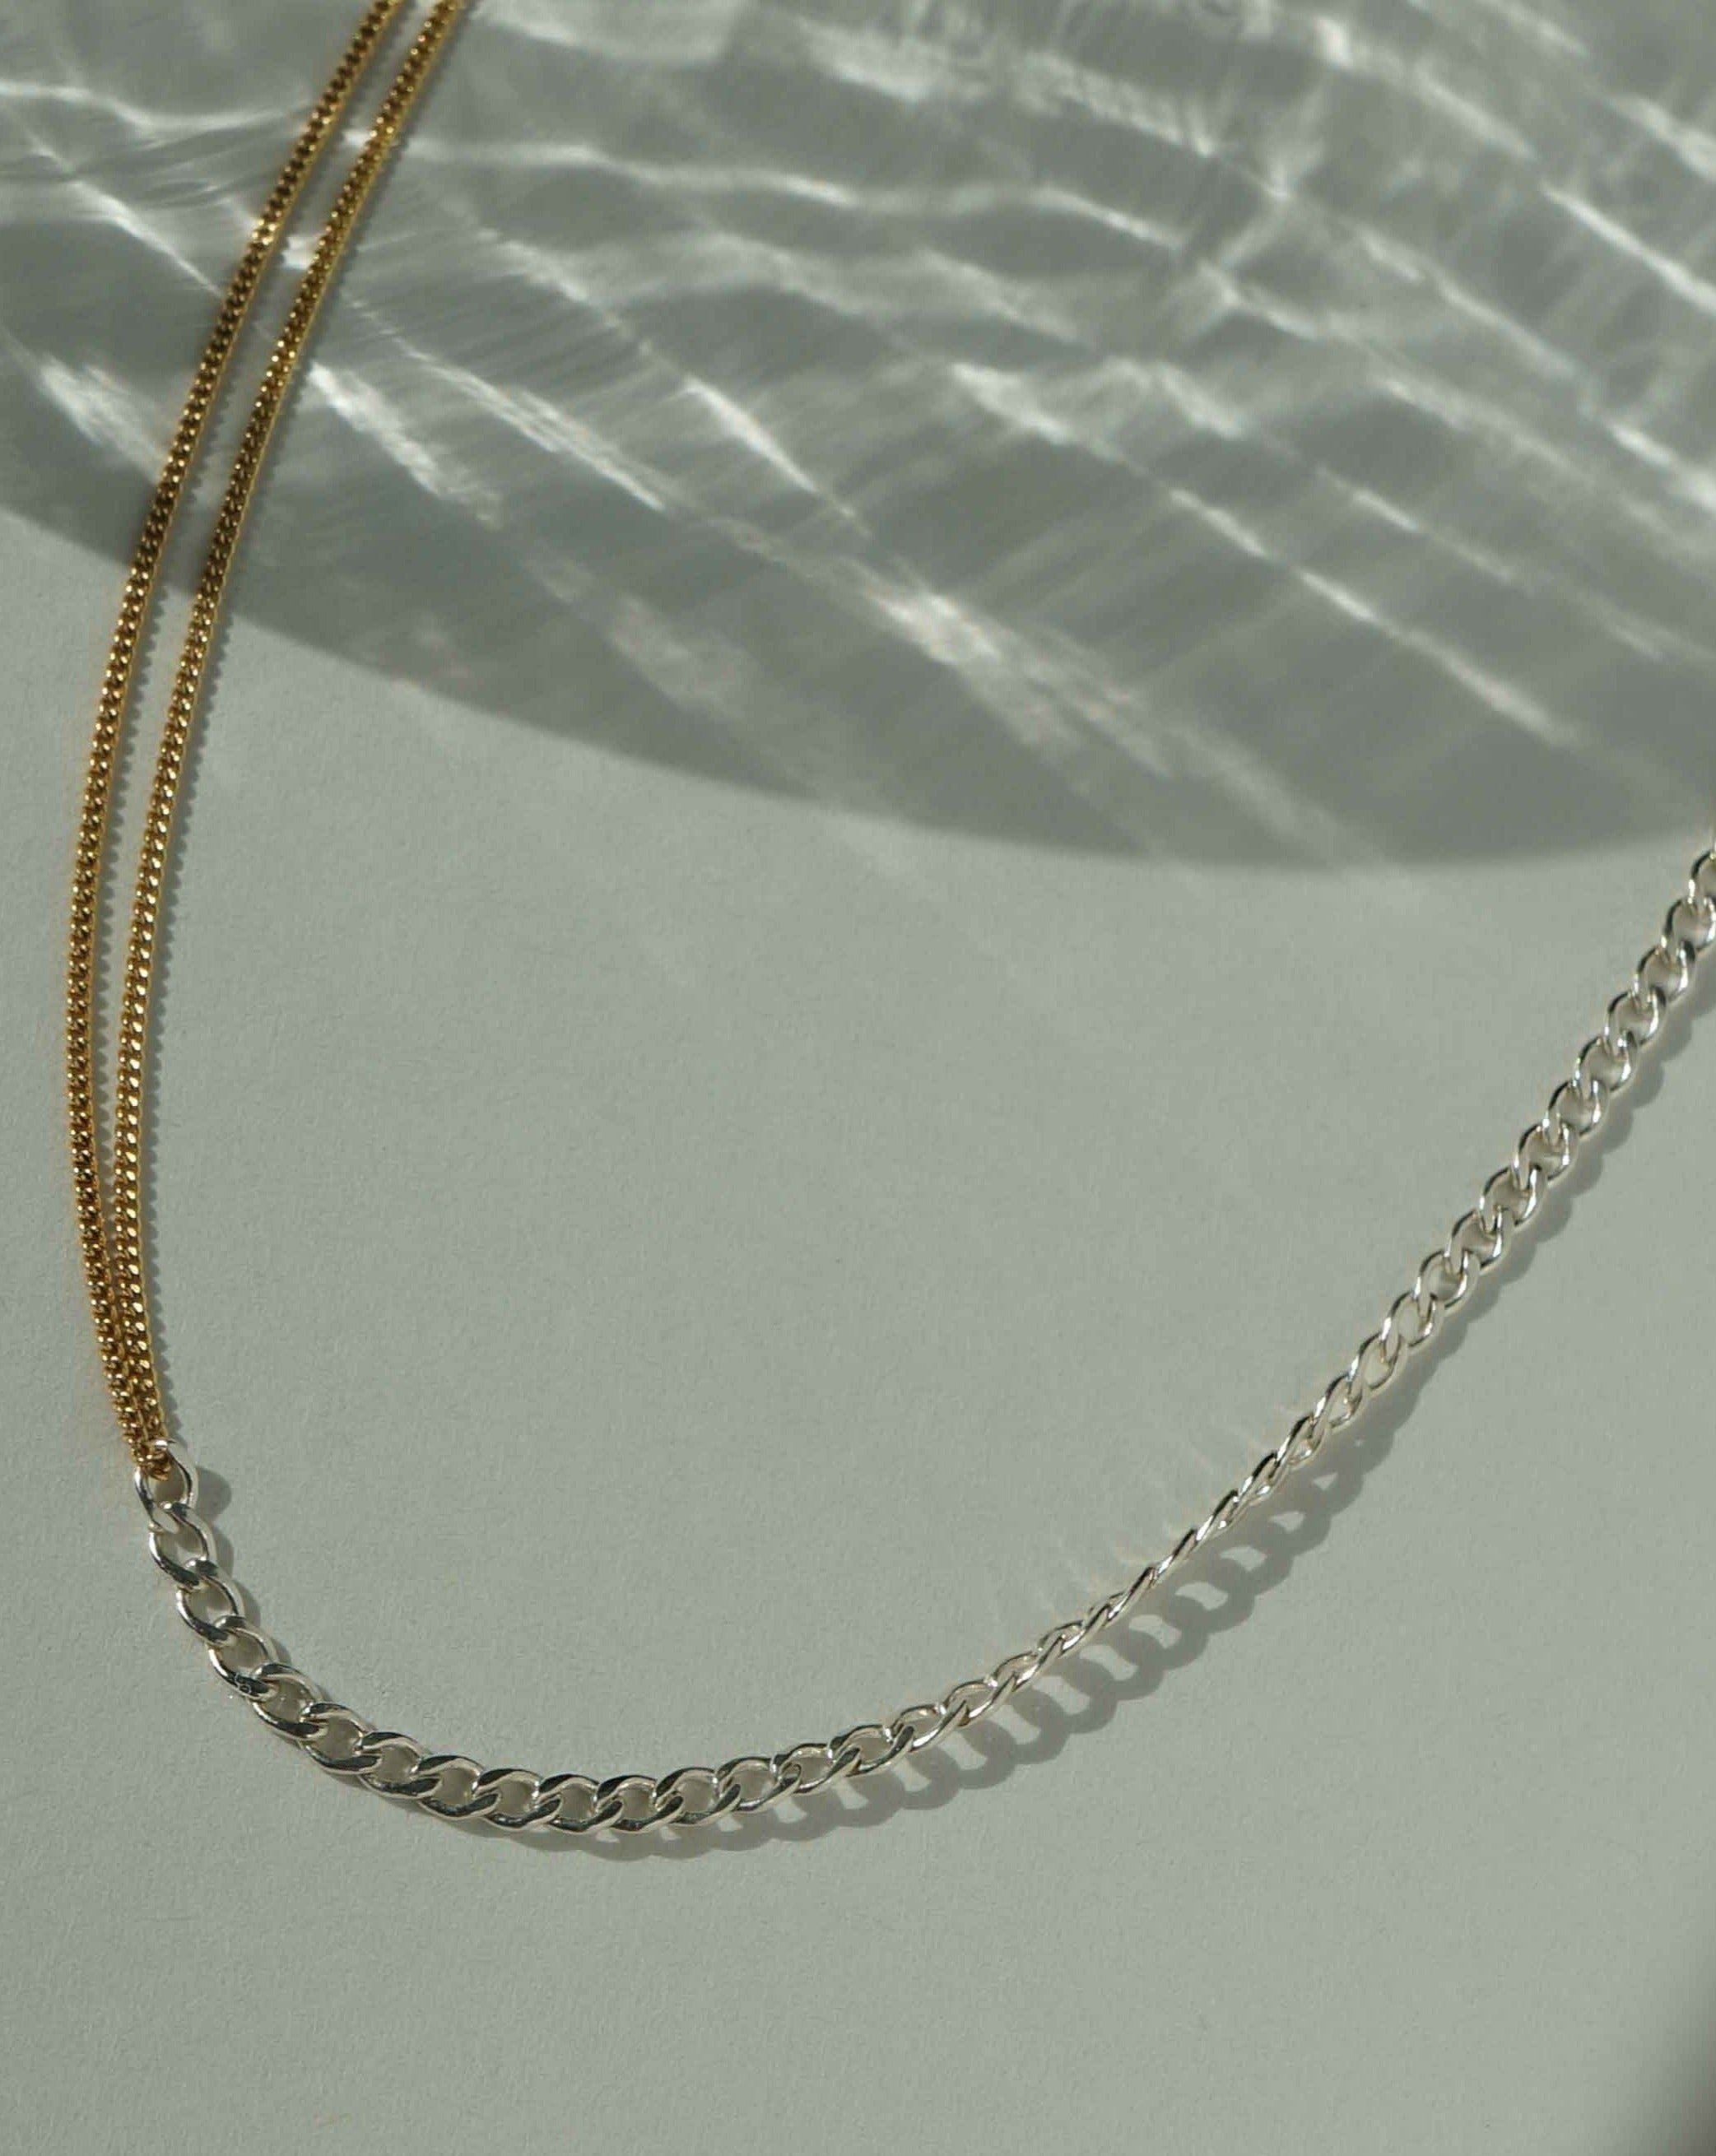 Monica Necklace by KOZAKH. A 14 to 16 inch adjustable length two tone necklace with gold box chain on one half and silver braided chain on the other half. 